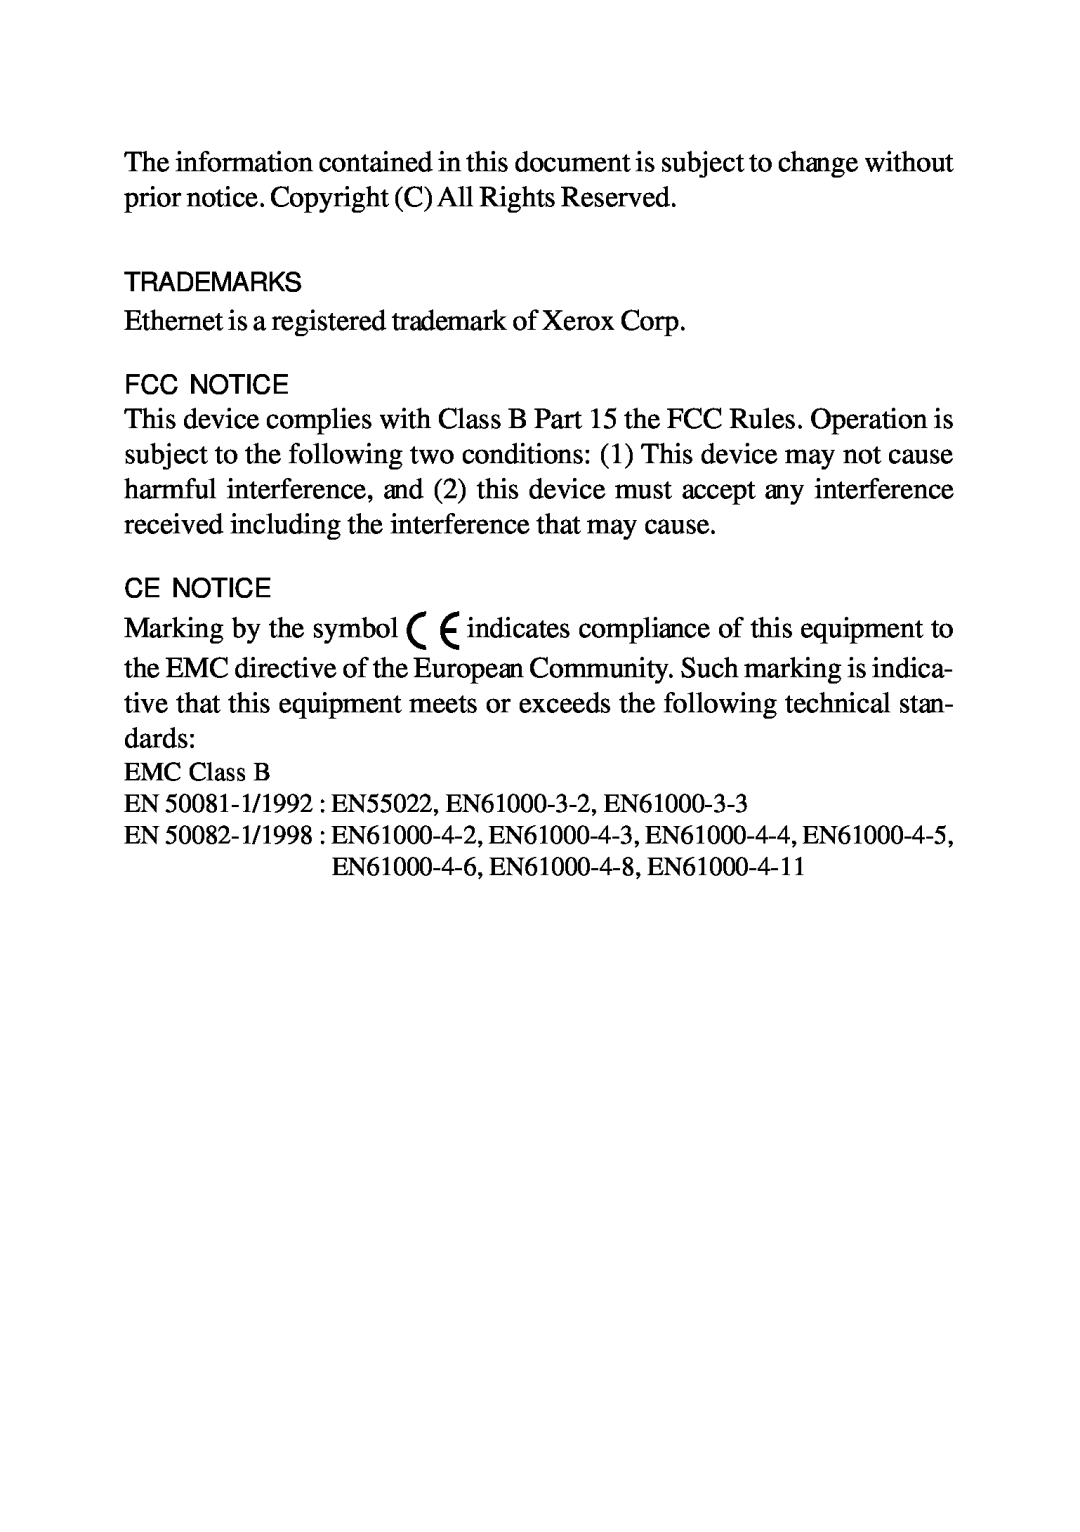 KTI Networks KS-108F manual Ethernet is a registered trademark of Xerox Corp 